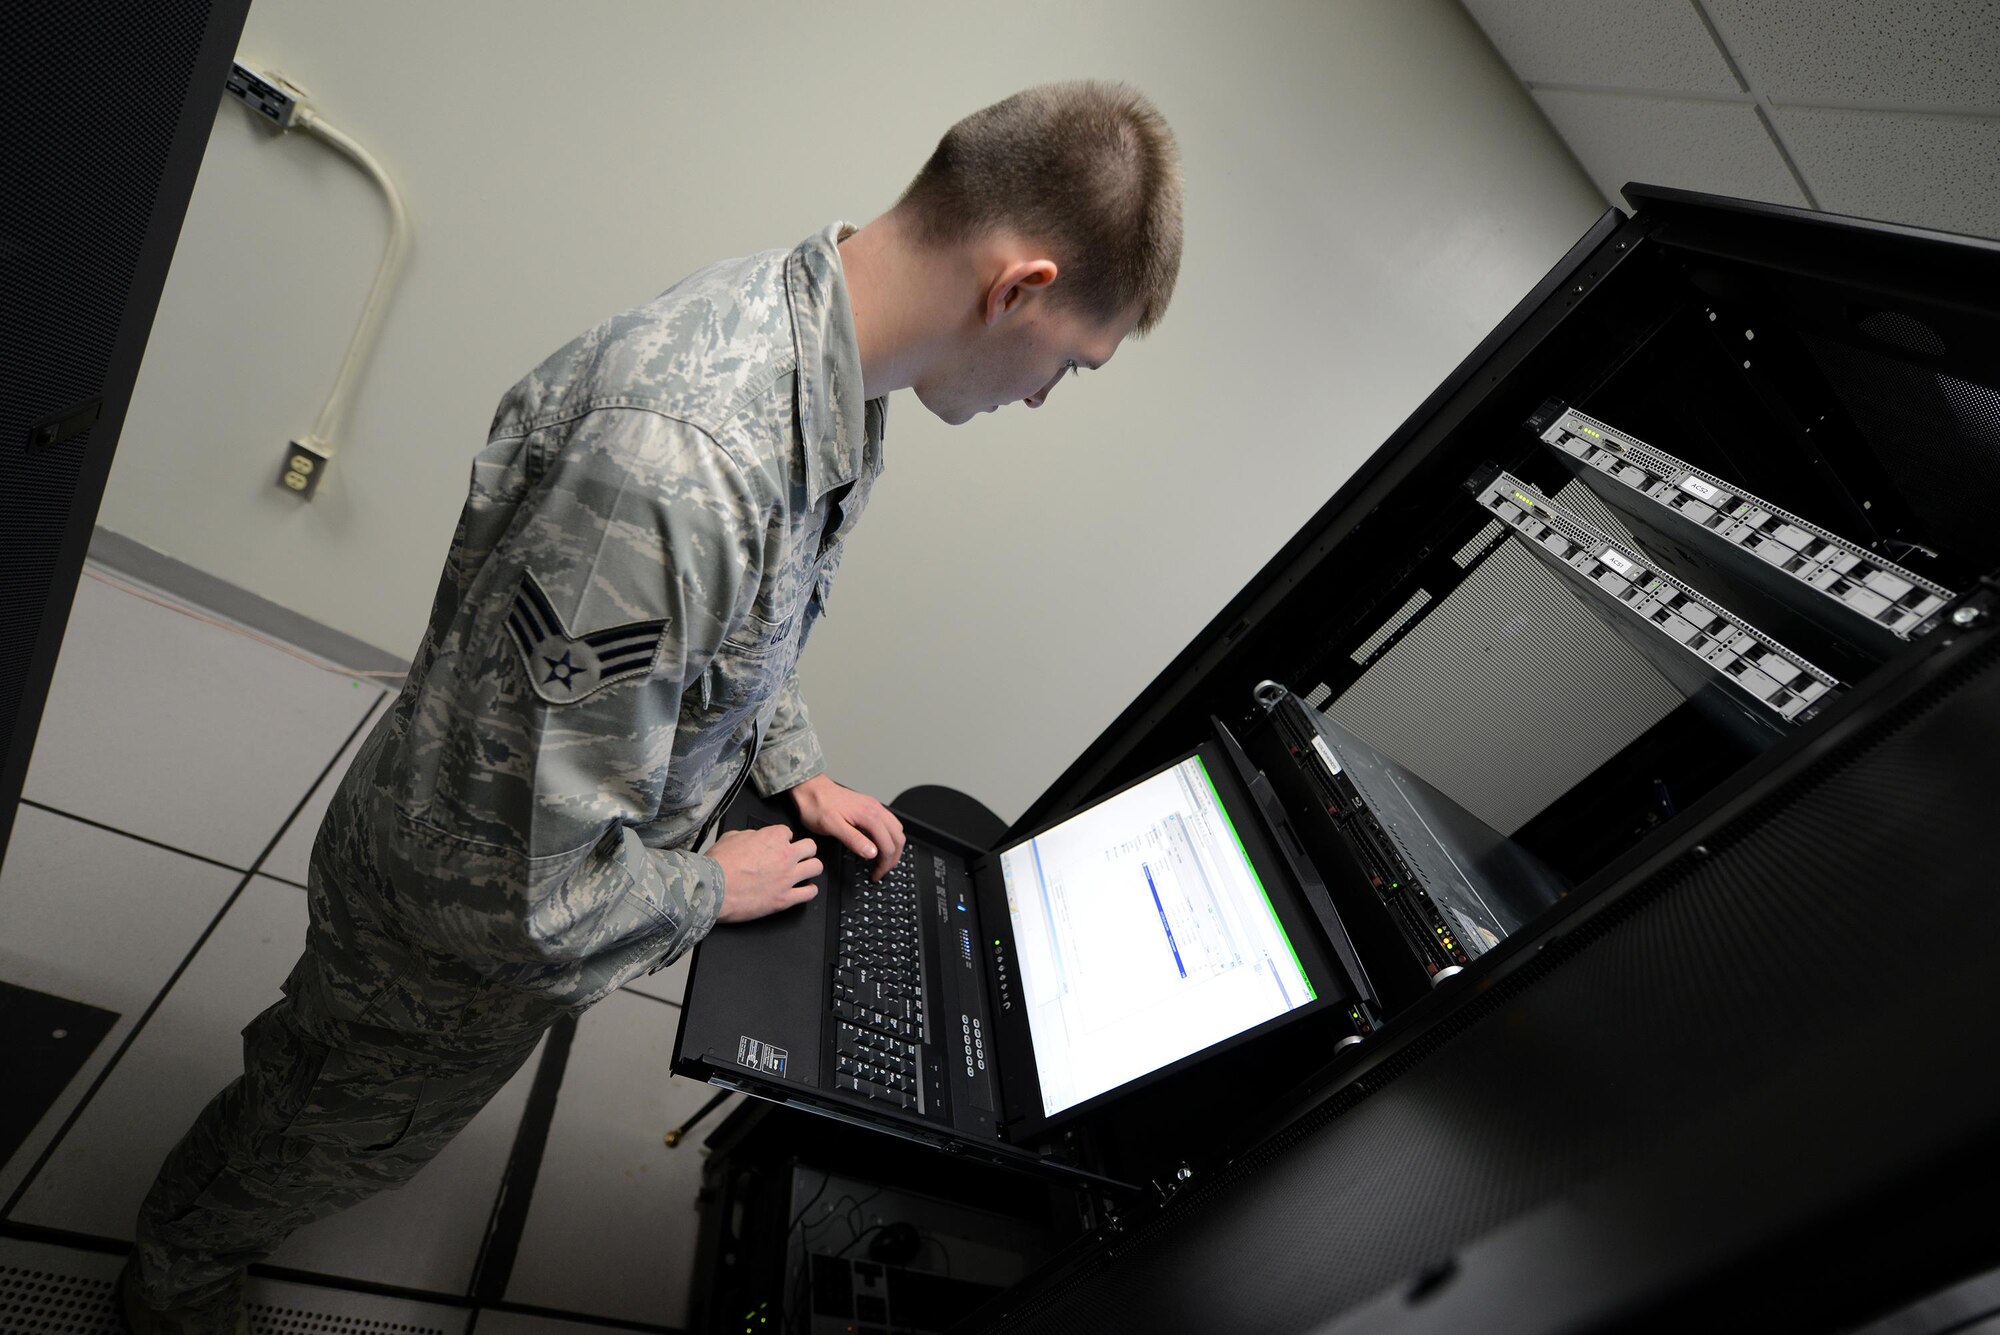 Senior Airman Daniel Clouse, 47th Communications Squadron cyber transport technician, configures a server on Laughlin Air Force Base, Texas, Dec. 1, 2015. Clouse was recently named the Air Force Outstanding Cyber Systems Airman at the Air Education and Training Command level for his outstanding performance. (U.S Air Force photo by Airman 1st Class Ariel D. Partlow)